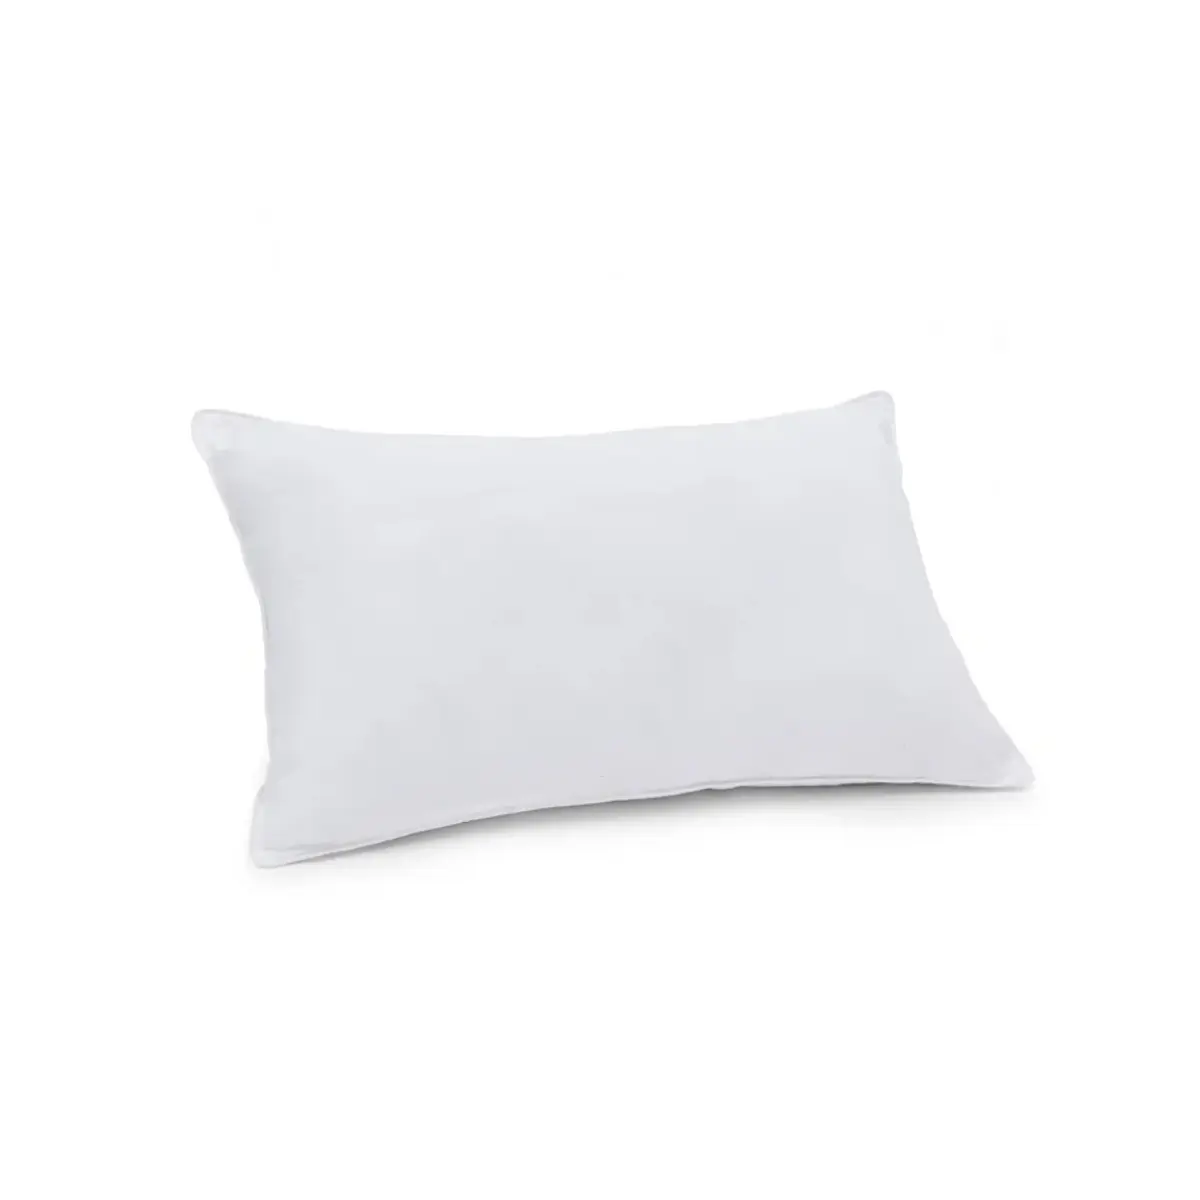 Image of Martex Baby Wool Pillow-White